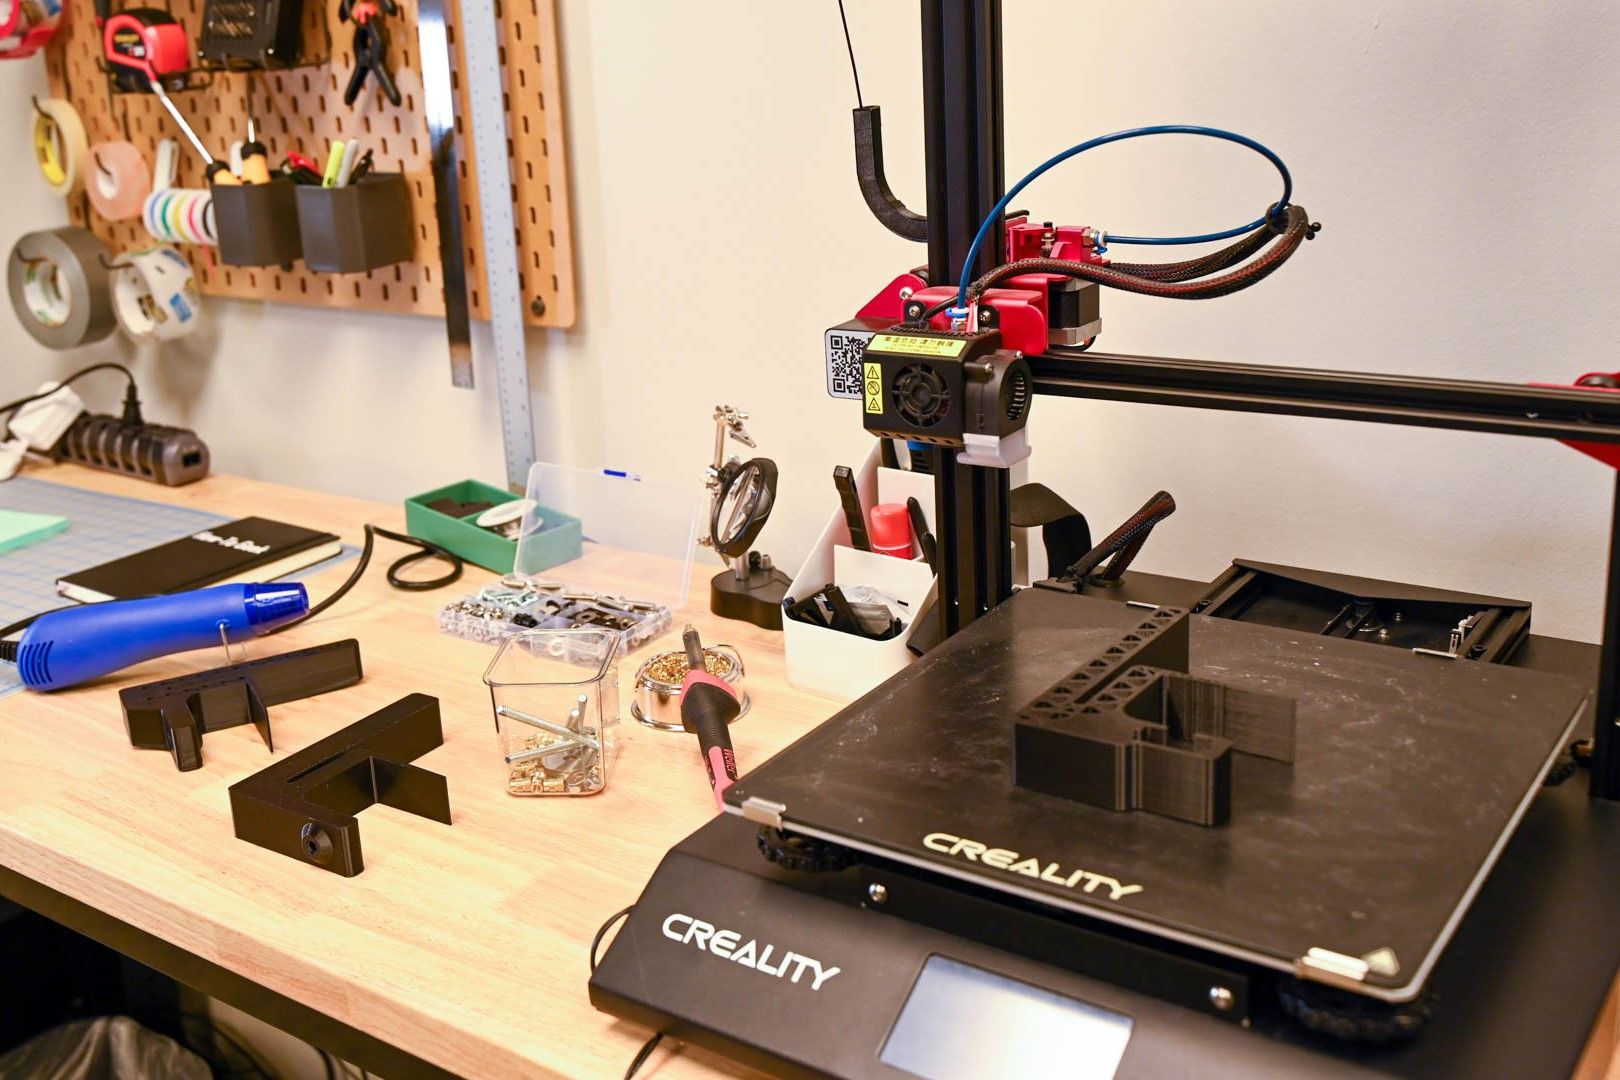 3D Printer on a workbench with soldering materials